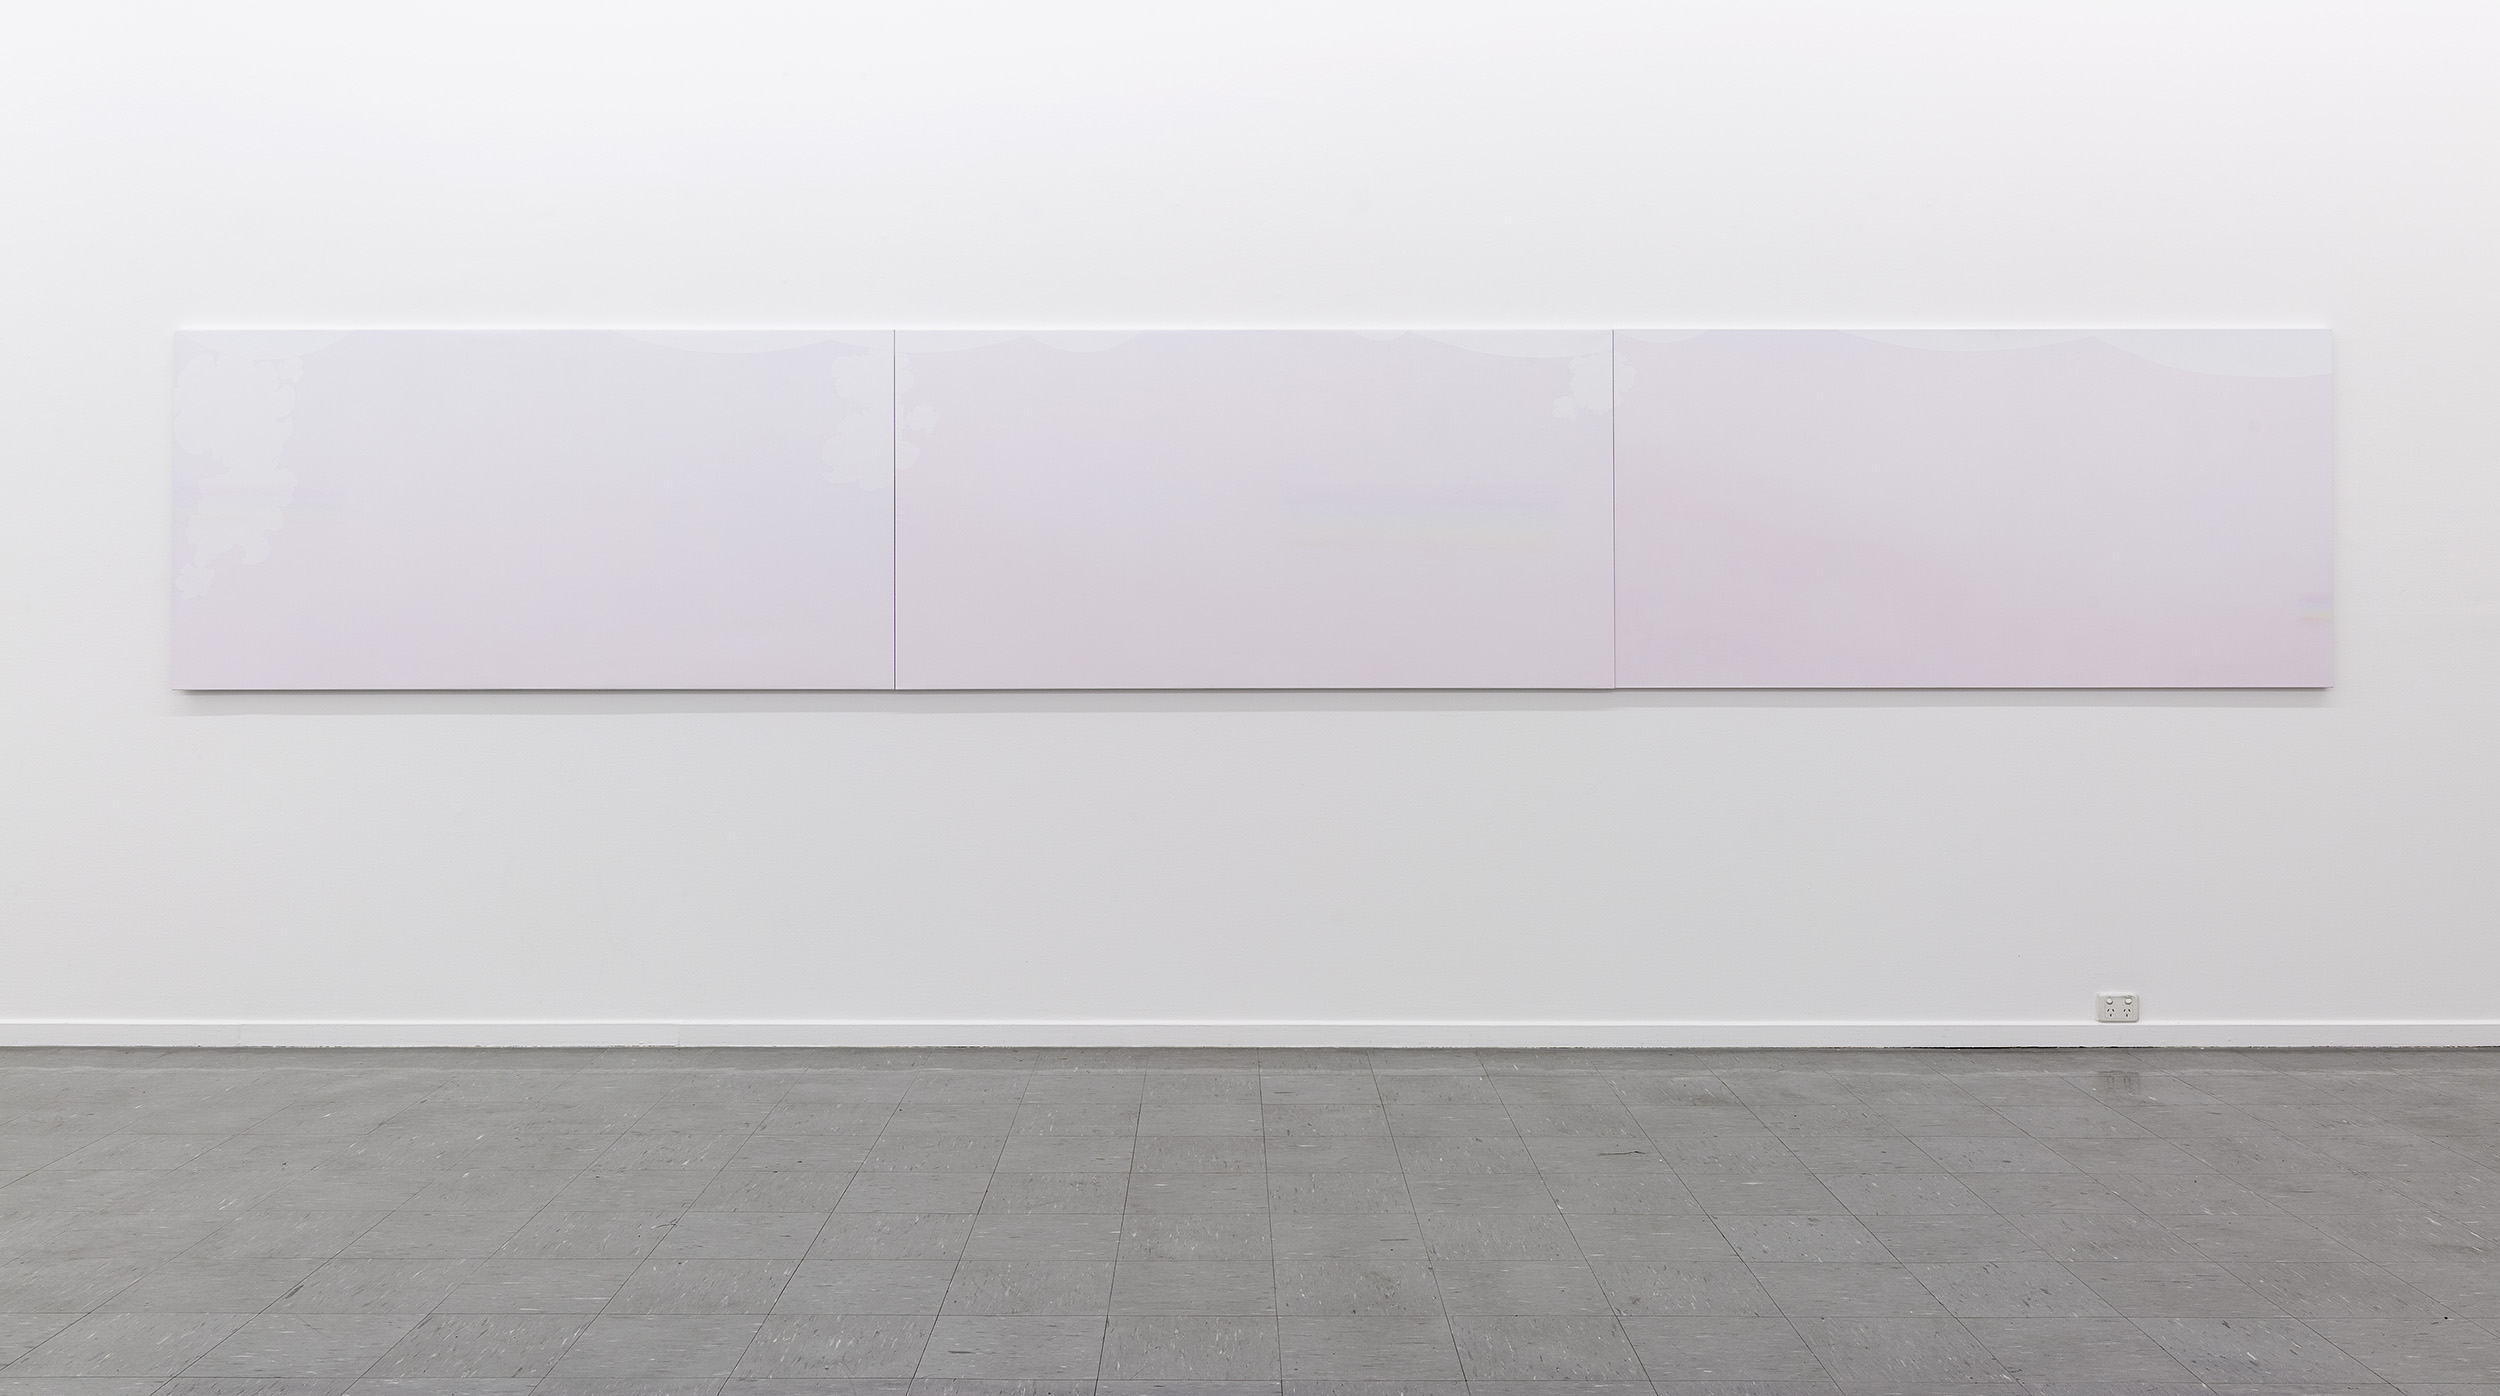 Installation view, Rosslynd Piggott, “Realm-peripheral scenes” – <em>Pink wave, prism flicker, descending peonies</em>, 2021-22, oil on linen 100 x 600 cm (3 panels). Courtesy of the artist and Sutton Gallery, Melbourne. Photo: Christian Capurro